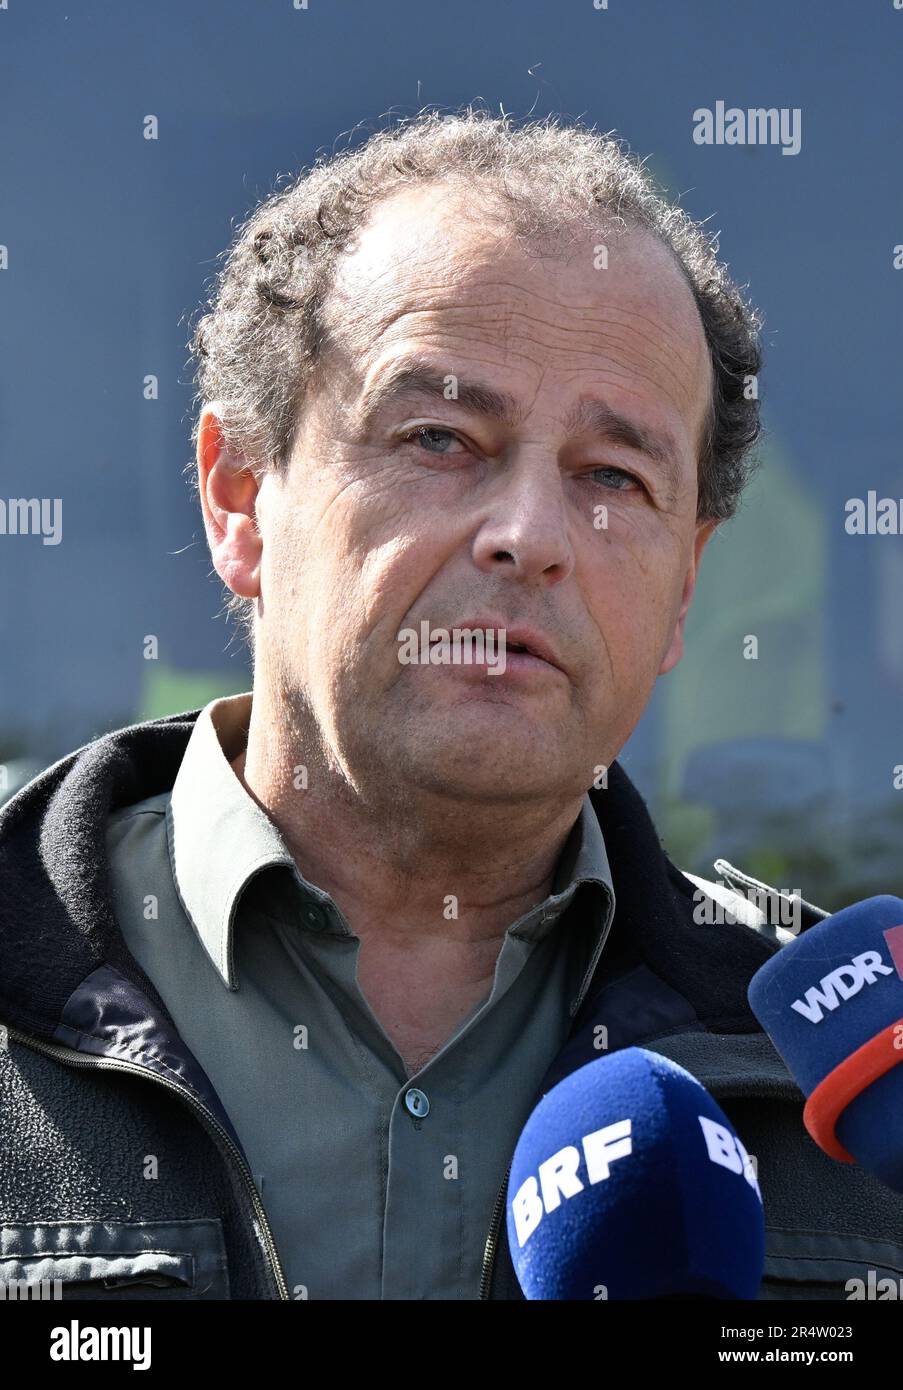 Rene Dahmen, head of cantonment DNF Elsenborn pictured during a press conference regarding the fire in the Hautes Fagnes between Ternell and Mutzenich, near the Belgian-German border, Tuesday 30 May 2023. More than 170 hectares of vegetation have already gone up in flames. The fire that was reportedly caused by humans started Monday evening and is still not under control. Belgian firefighters are being assisted by German colleagues and civil protection. They are equipped with a drone to monitor the area and the spread of the flames, a firefighting helicopter is expected to intervene later in t Stock Photo